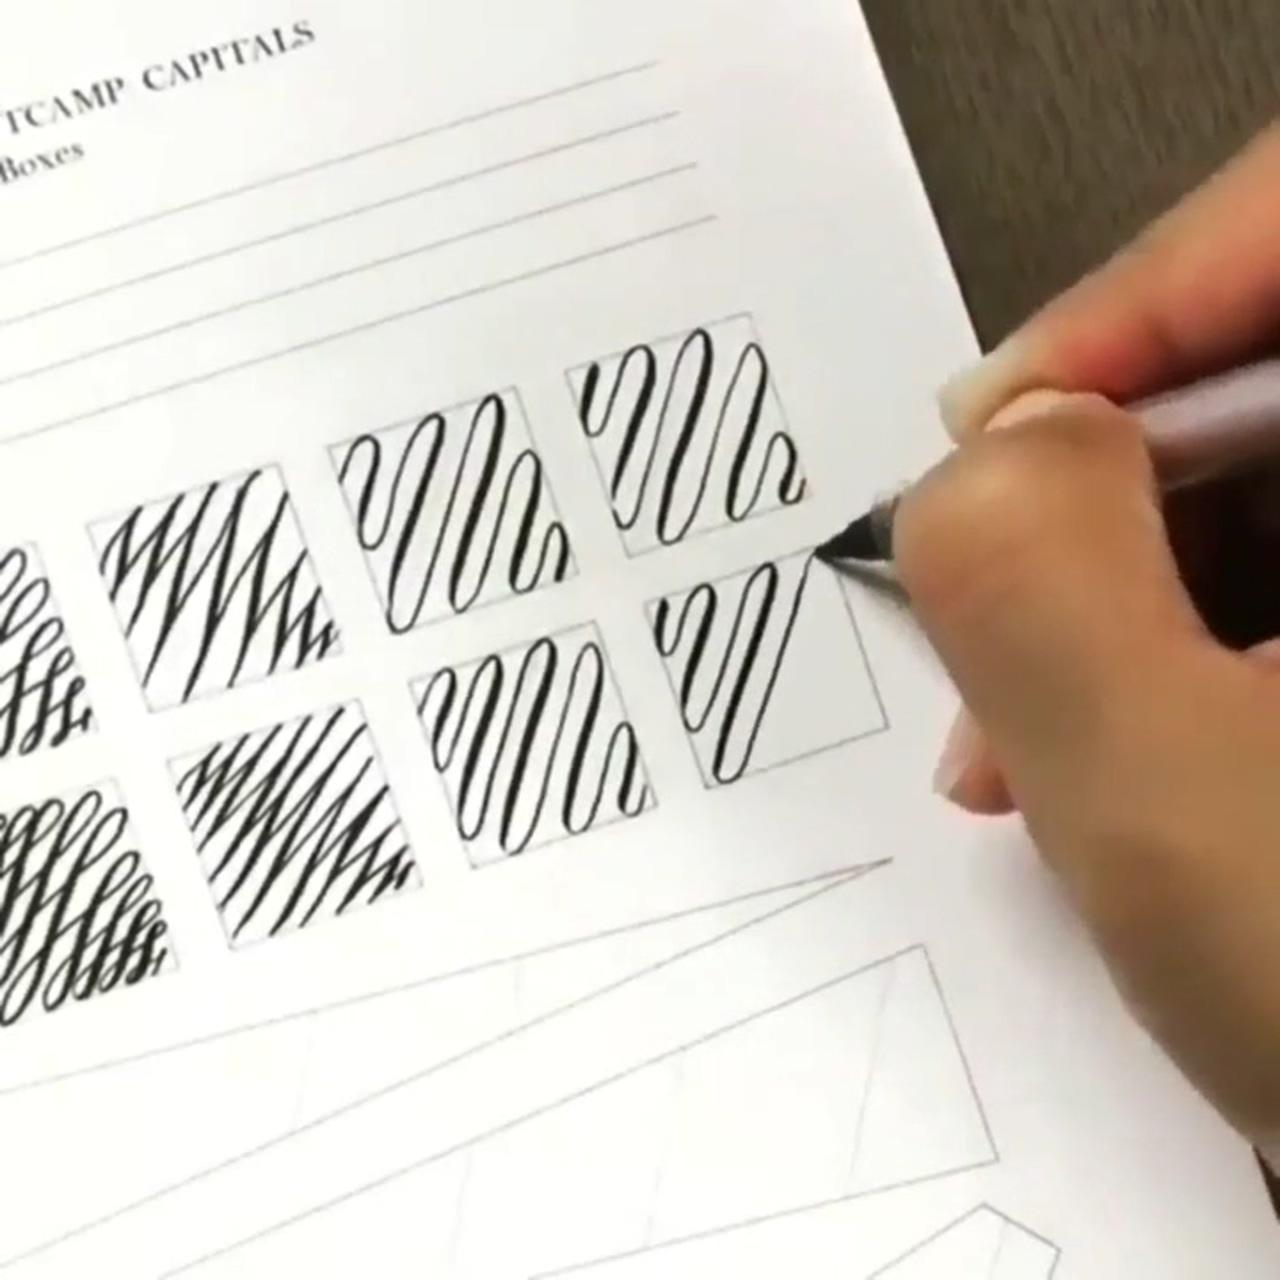 Some calligraphy drills; calligraphy lessons